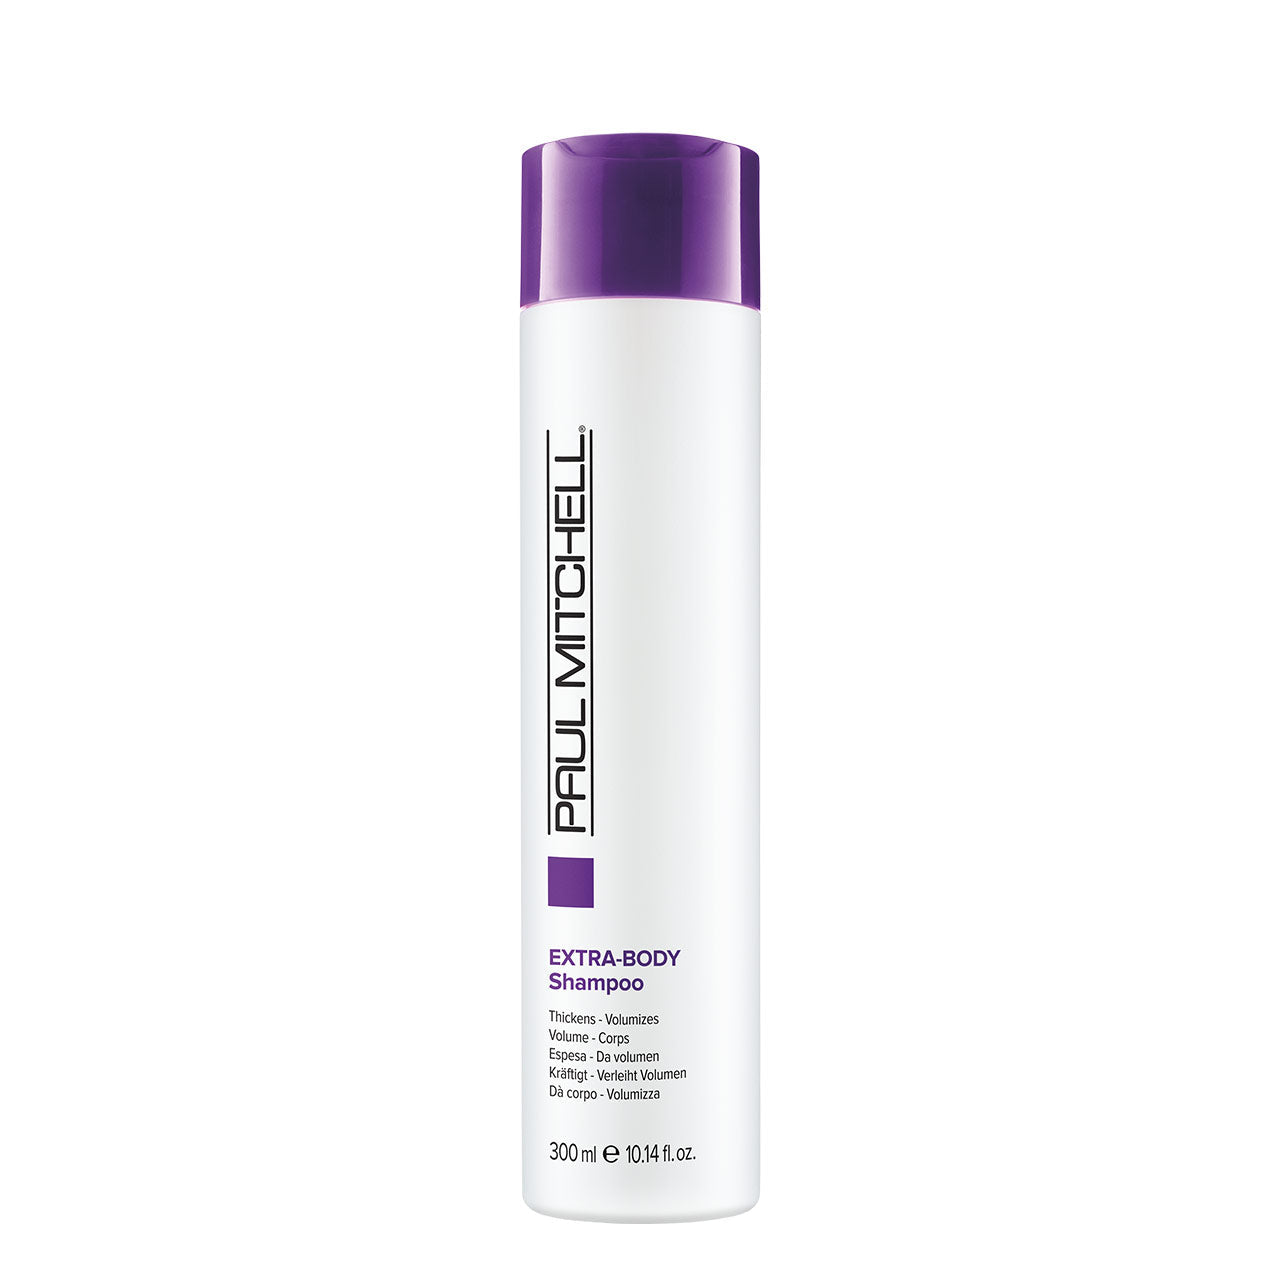 Extra-Body Shampoo - 300ML - by Paul Mitchell |ProCare Outlet|